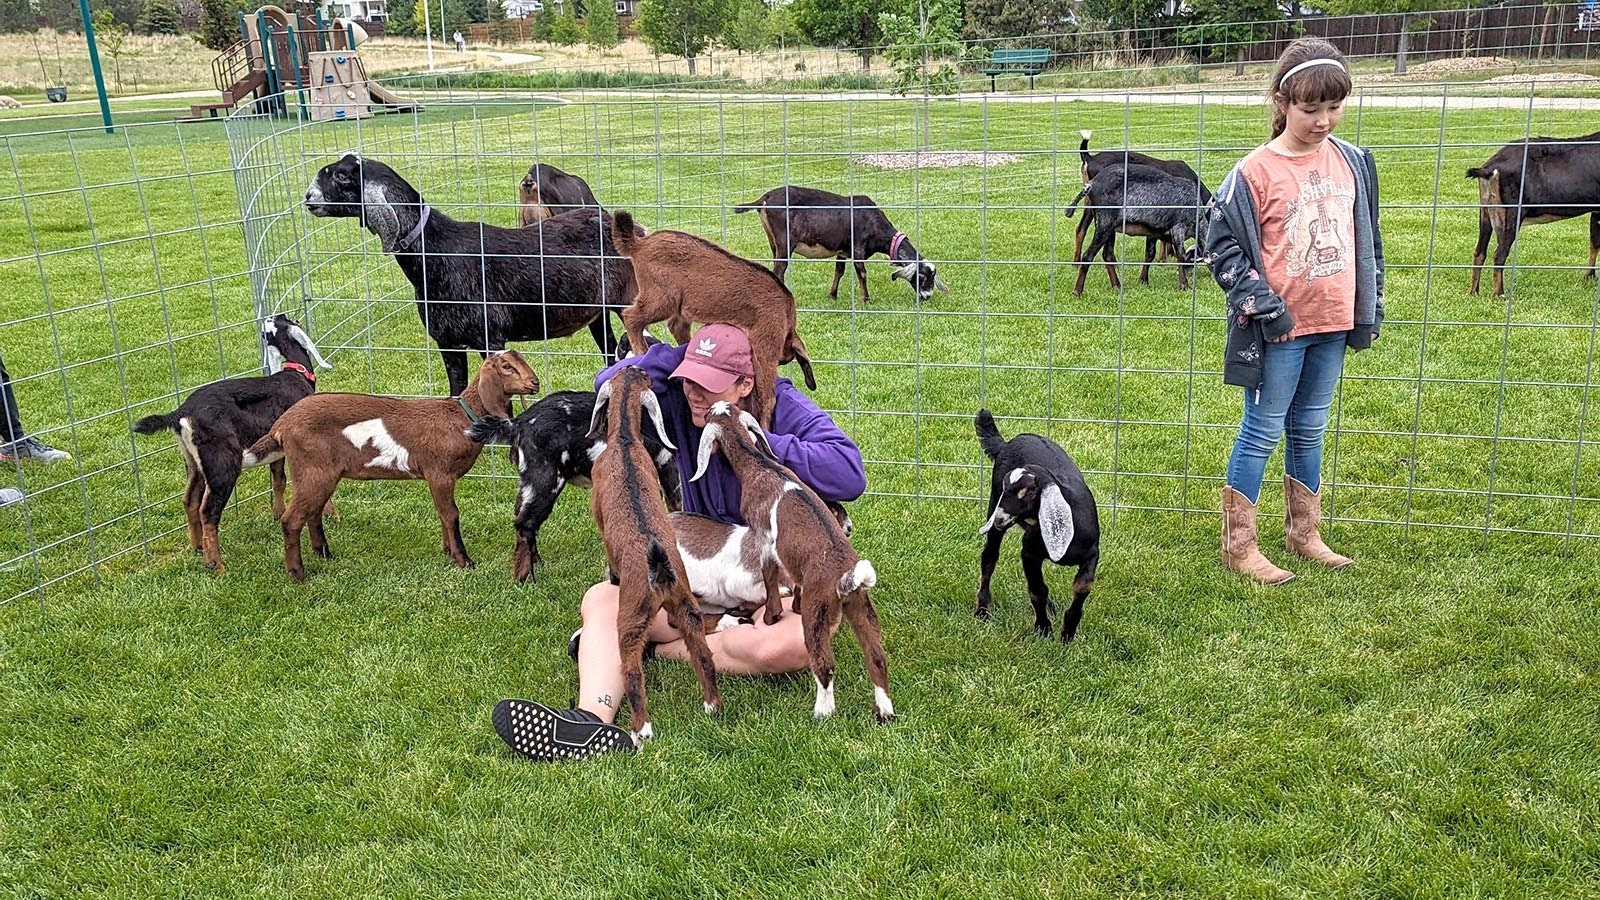 Sit down among the goats and you quickly become part of their idea of goat yoga, as Kristi Walk finds out.